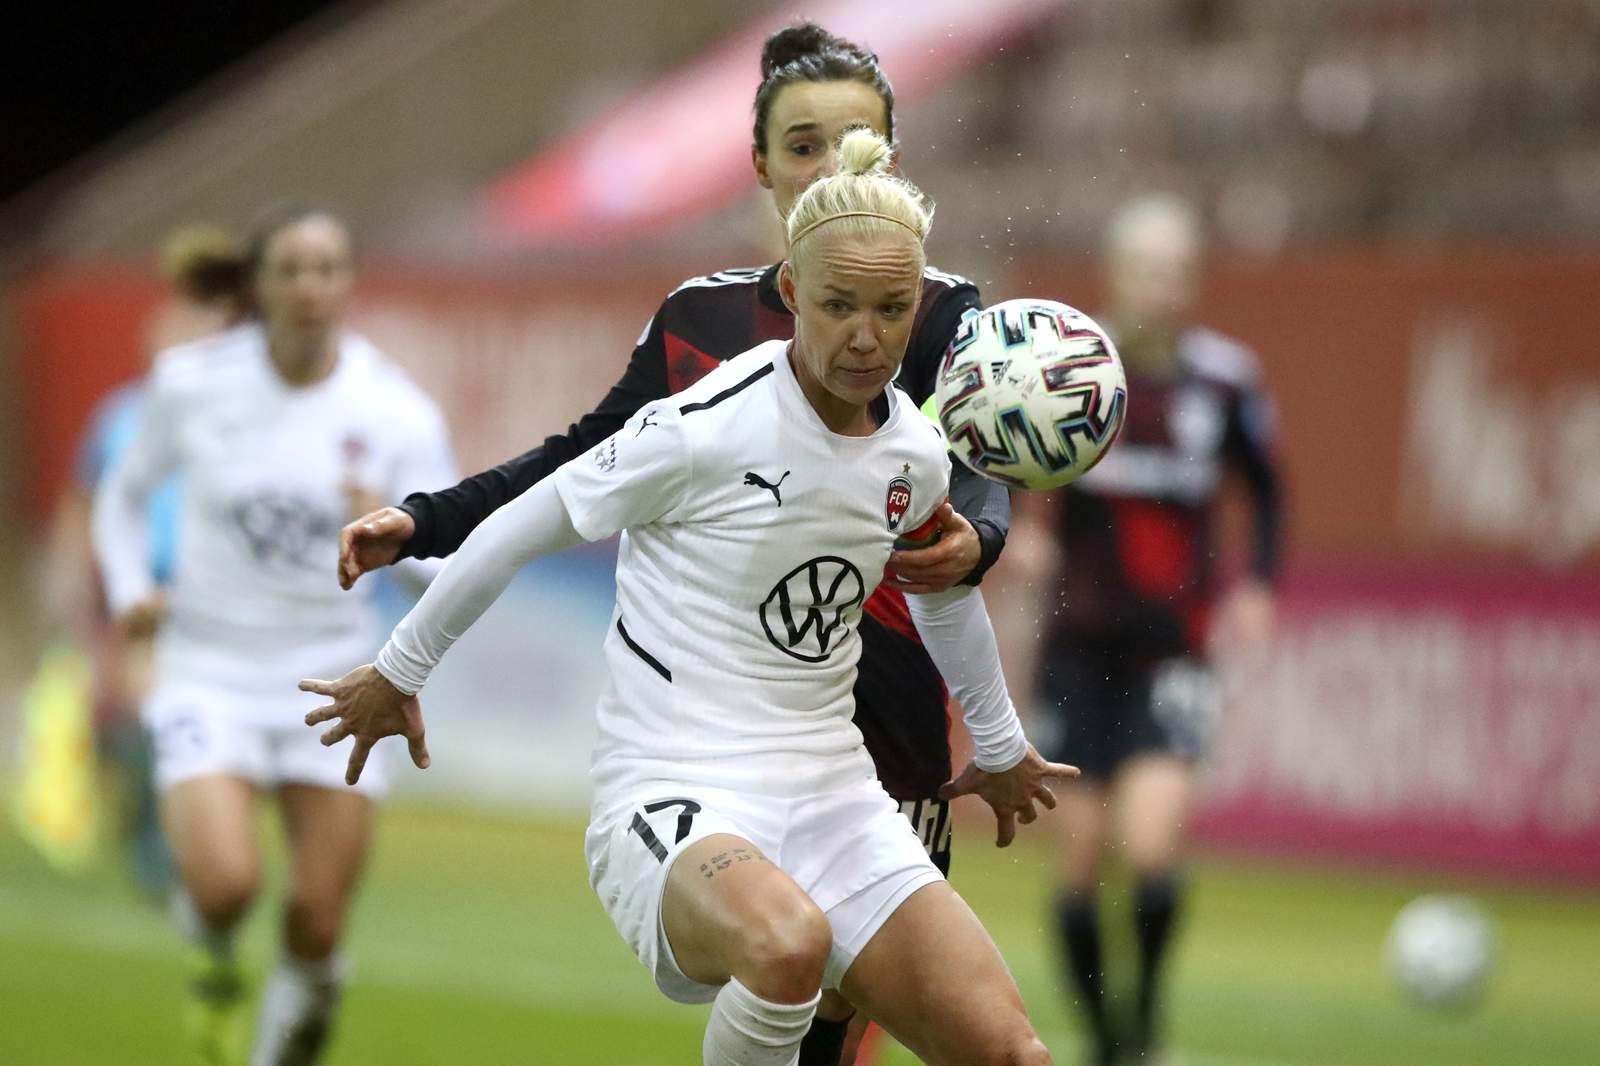 European women's soccer vision sees place for indie clubs